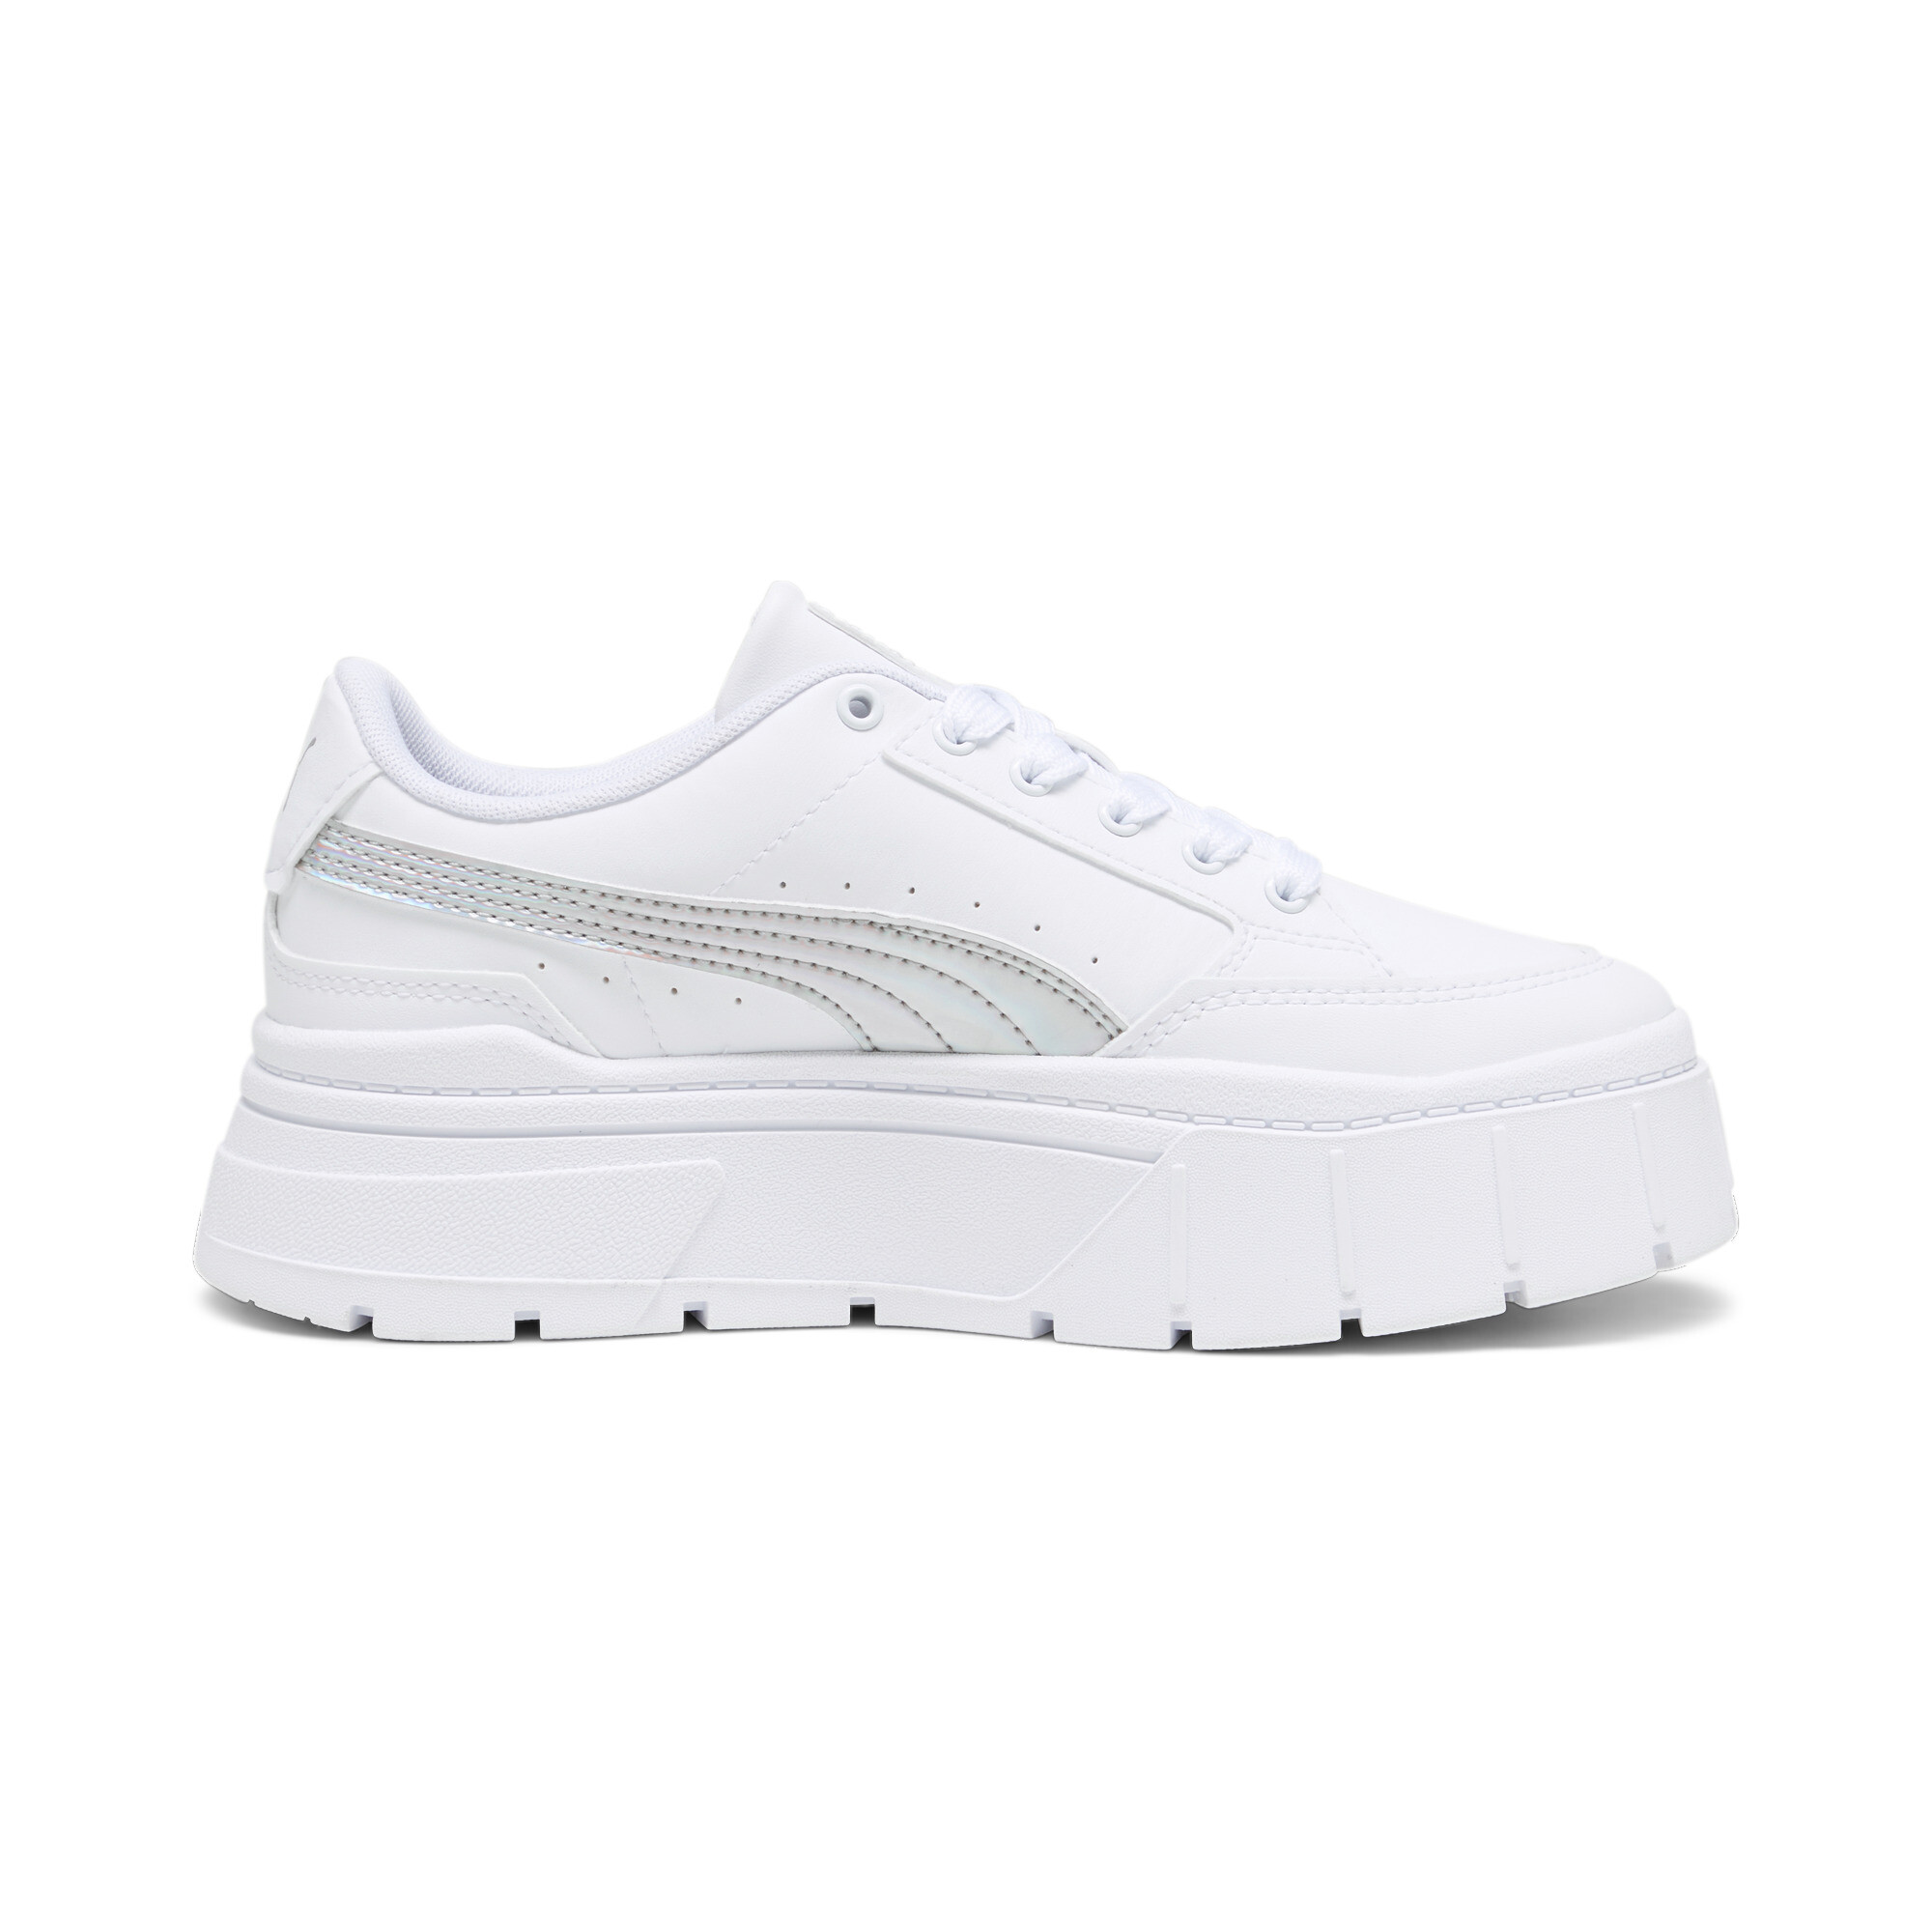 Women's Puma Mayze Stack Iridescent Youth Sneakers, White, Size 36, Shoes